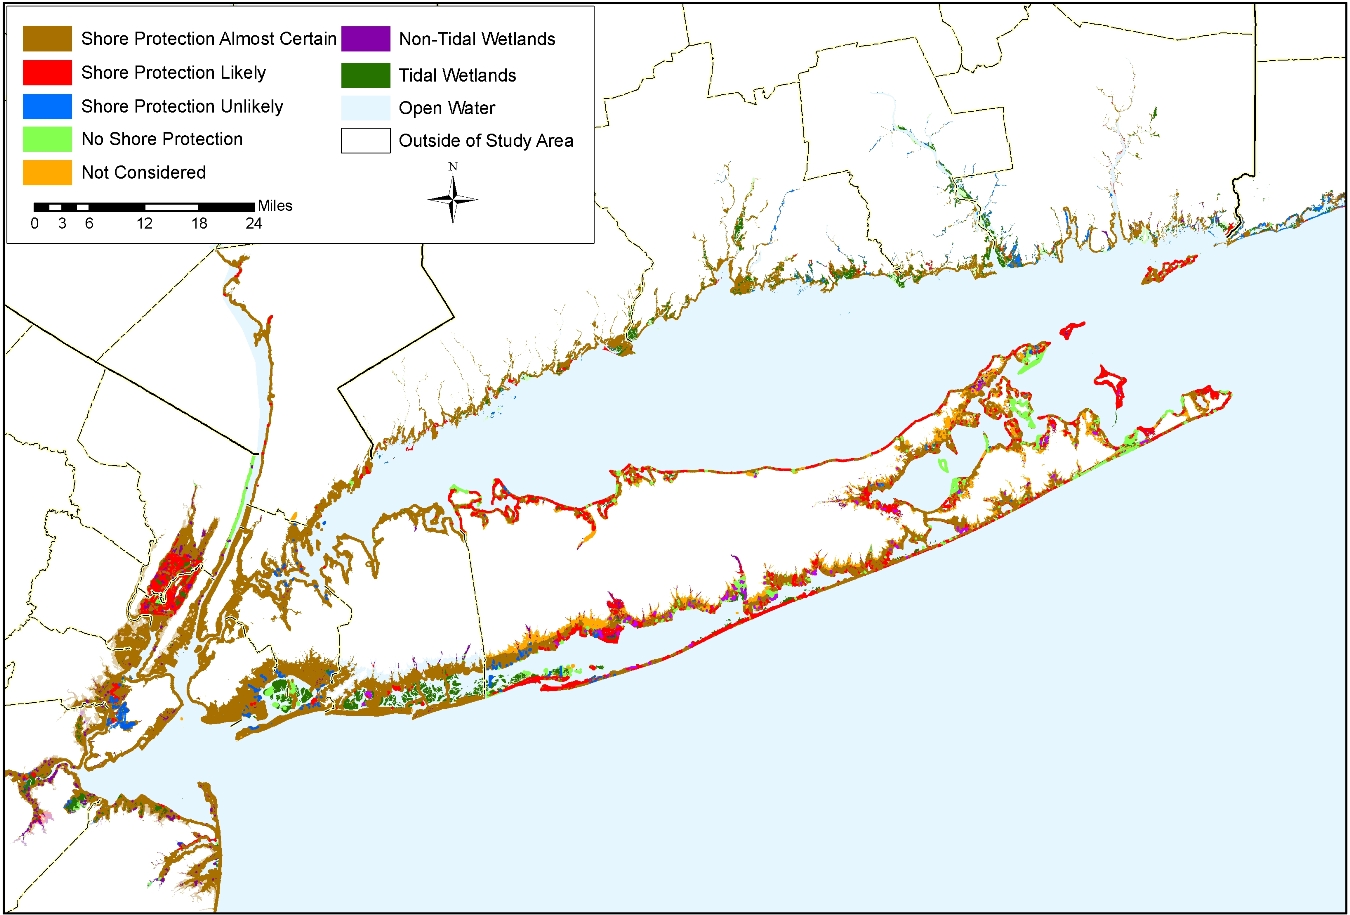 New York State sea level rise planning map